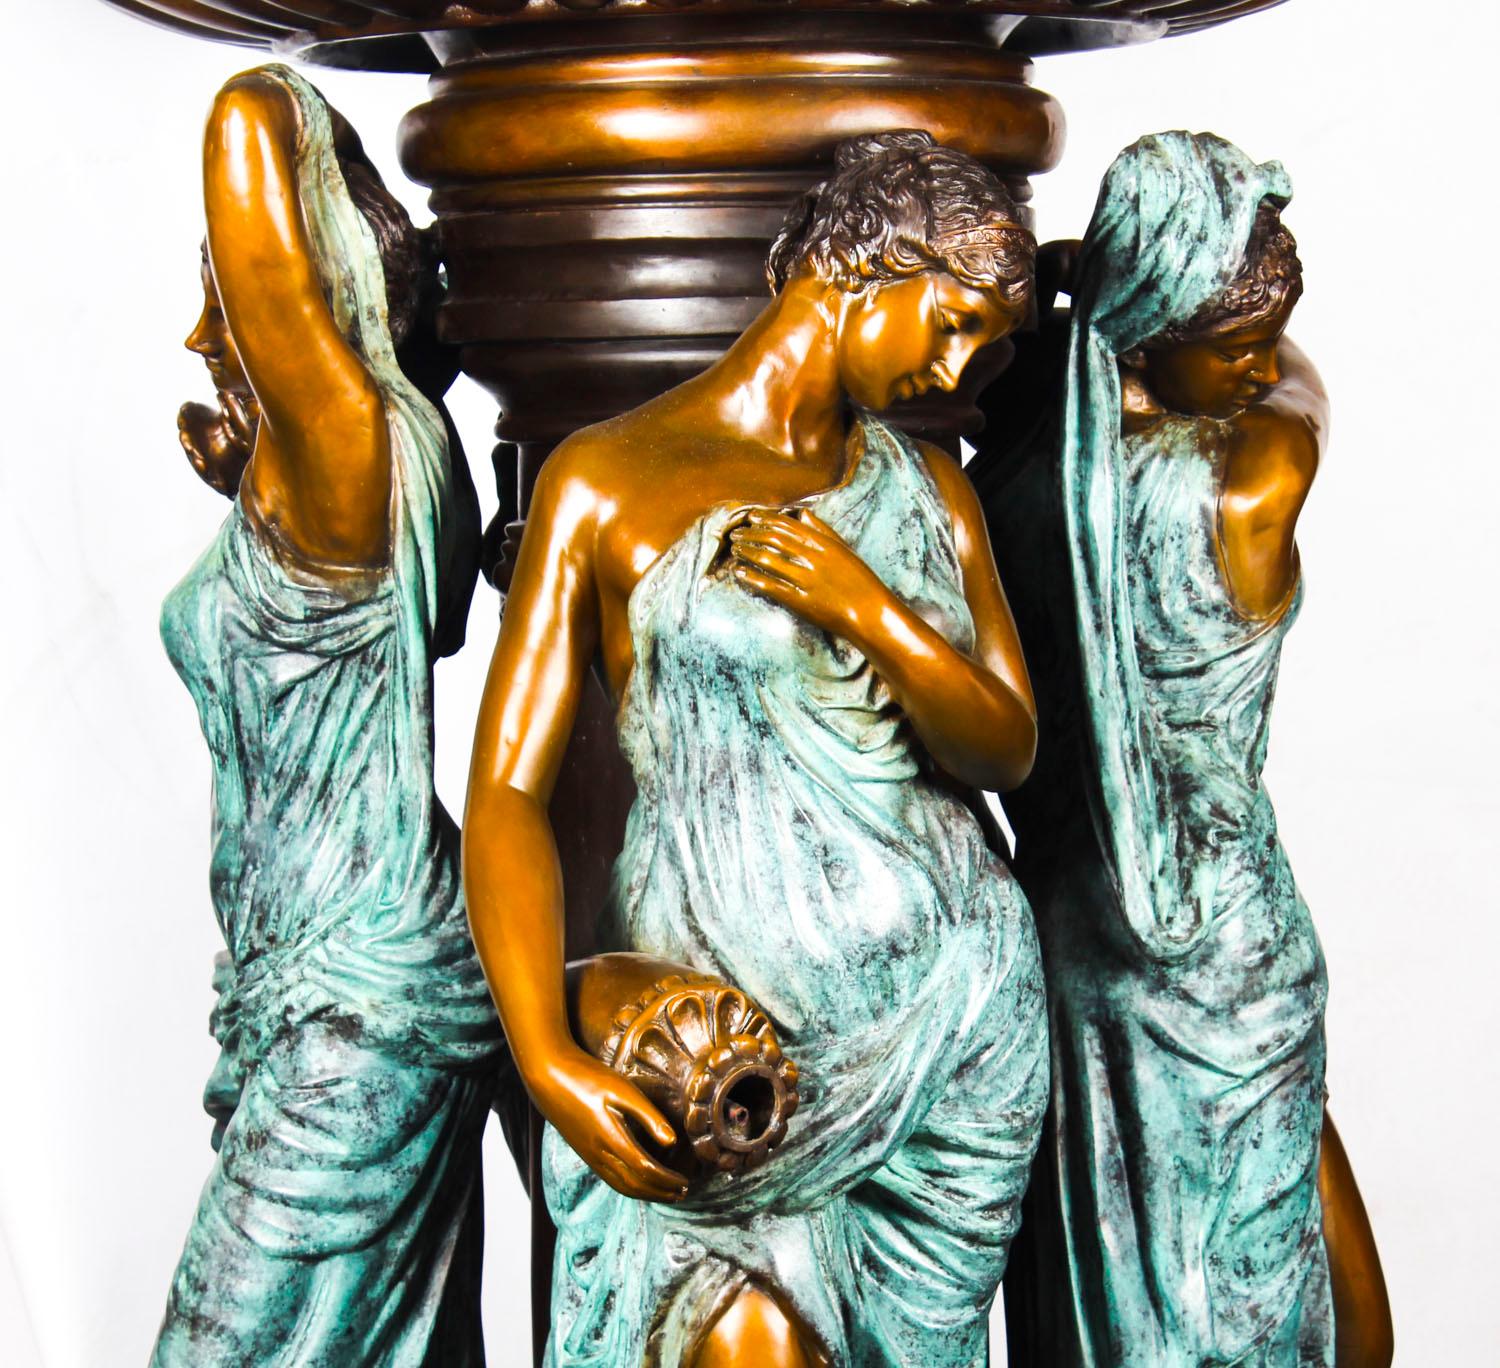 Vintage Monumental Neo-Classical Revival Bronze Sculptural Pond Fountain 20th C For Sale 6